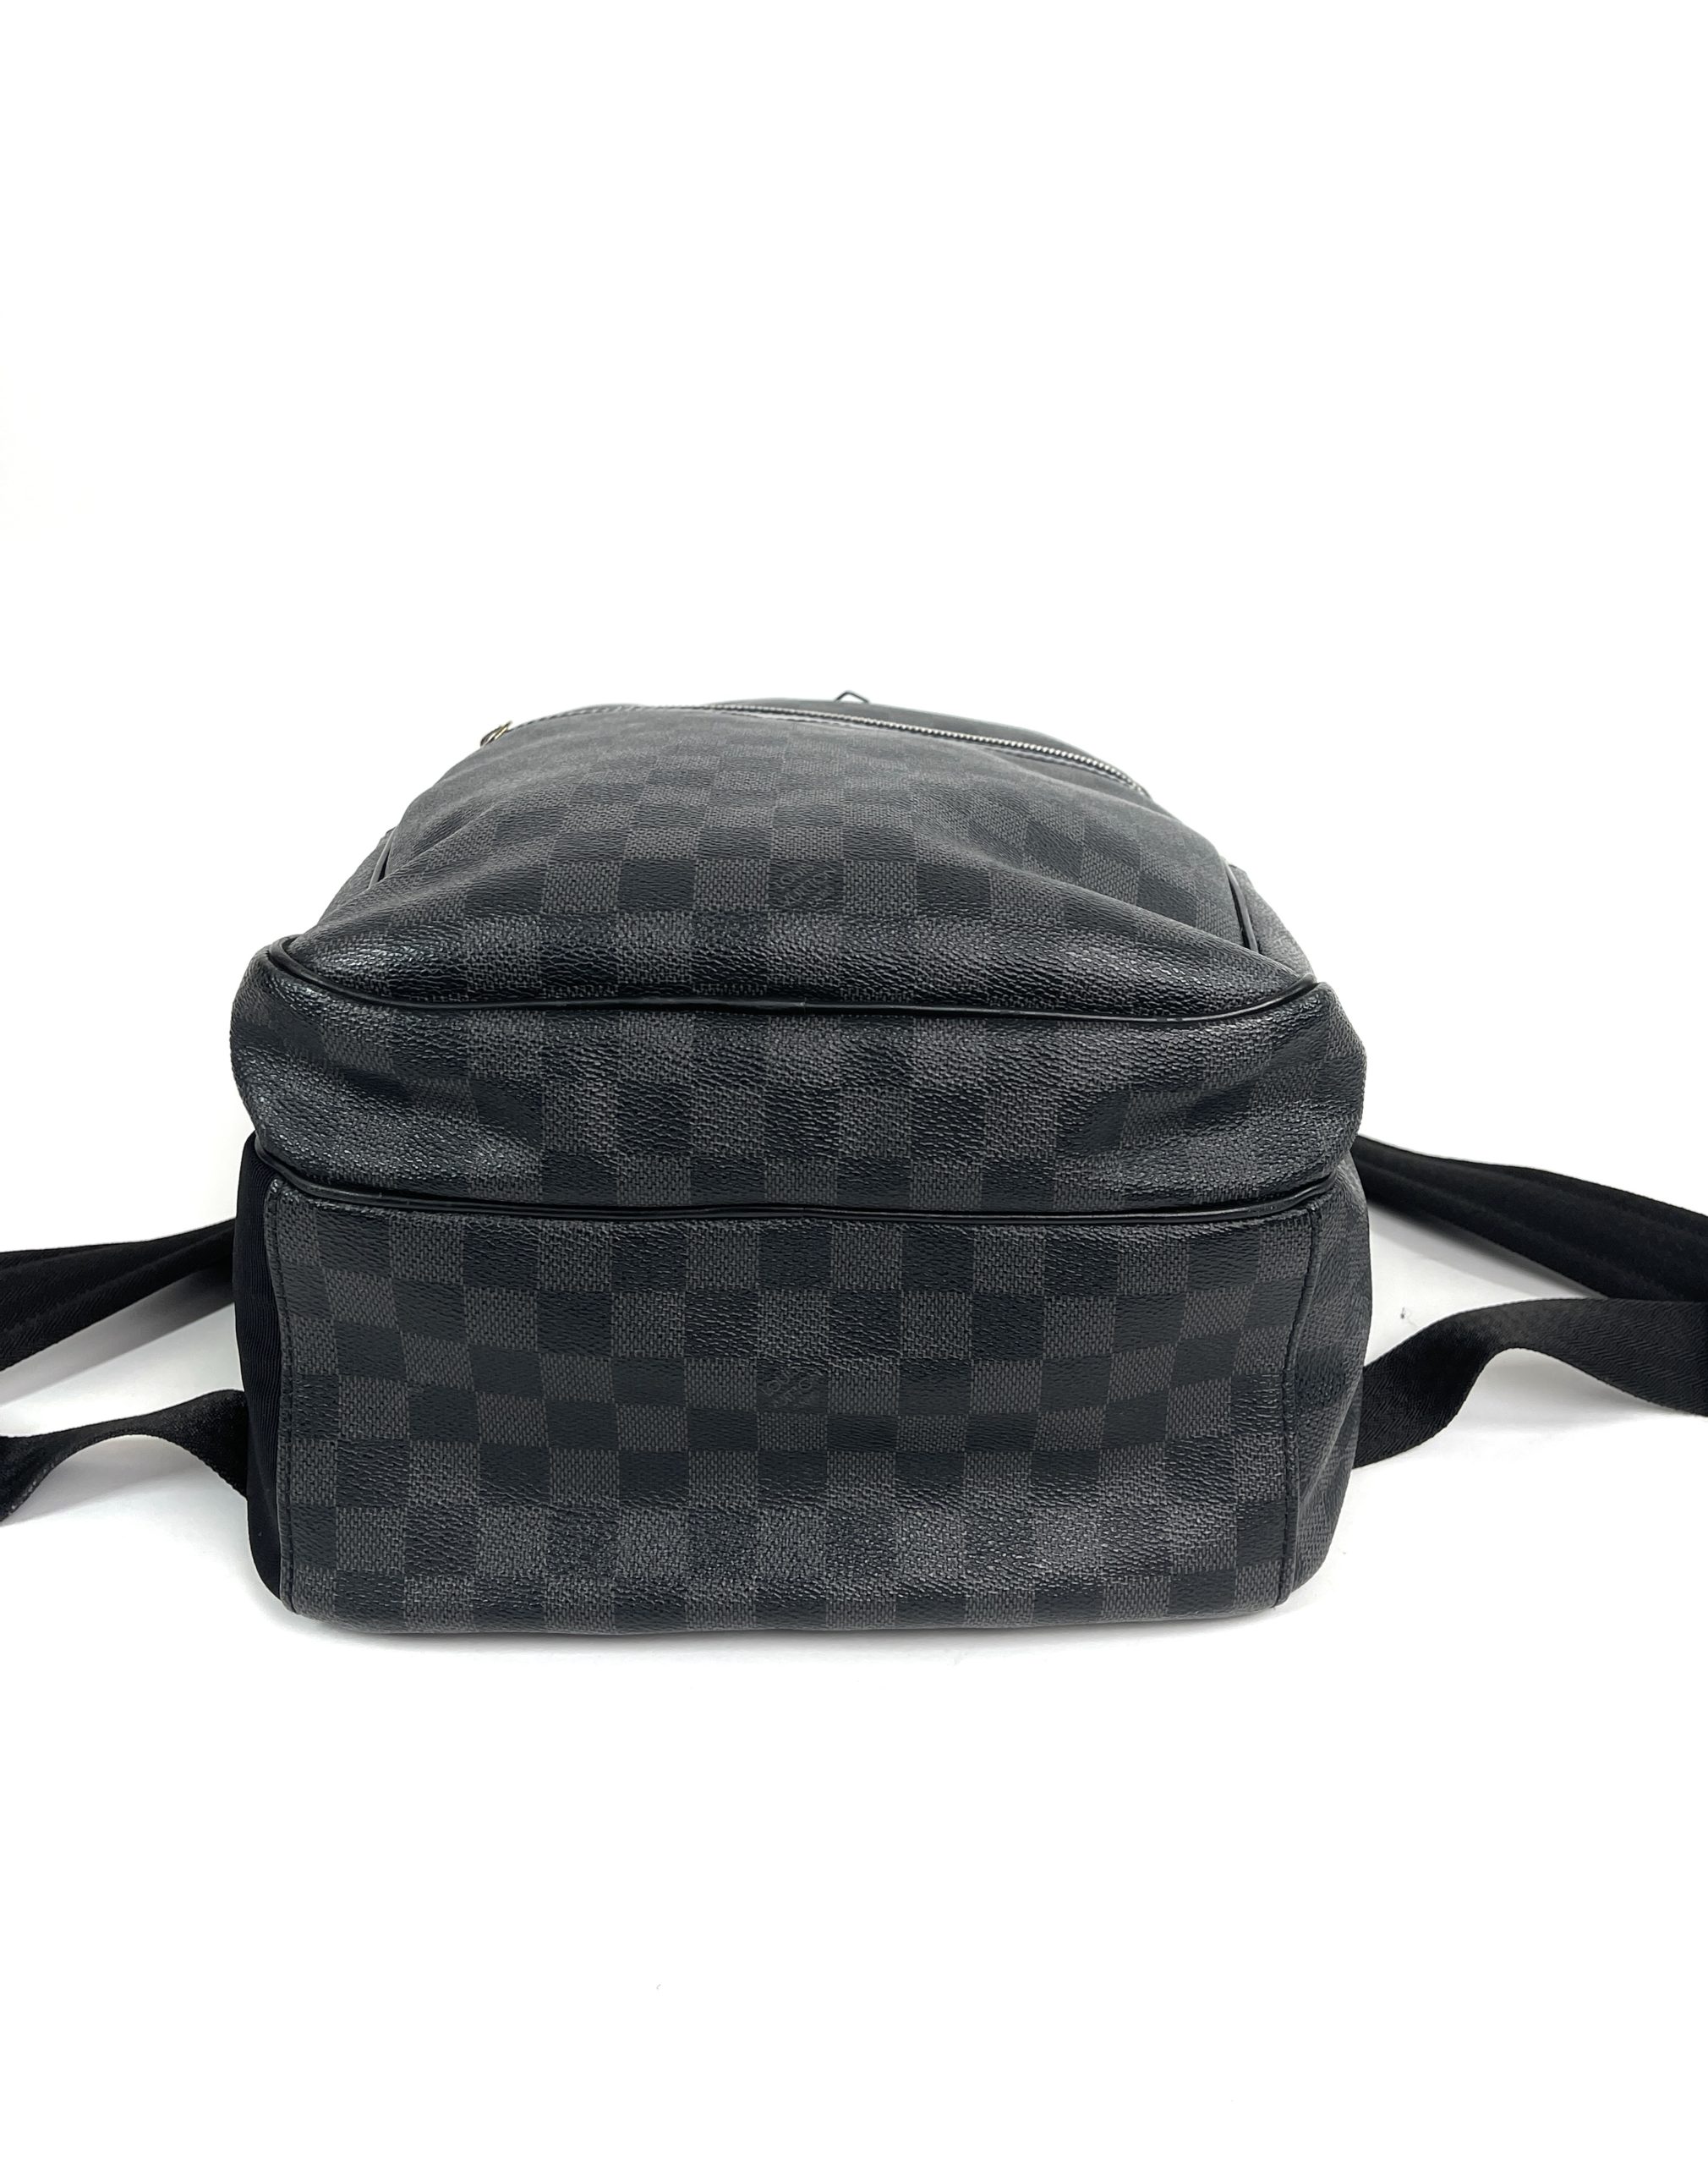 Louis Vuitton Michael Backpack Damier Graphite – Chicago Pawners